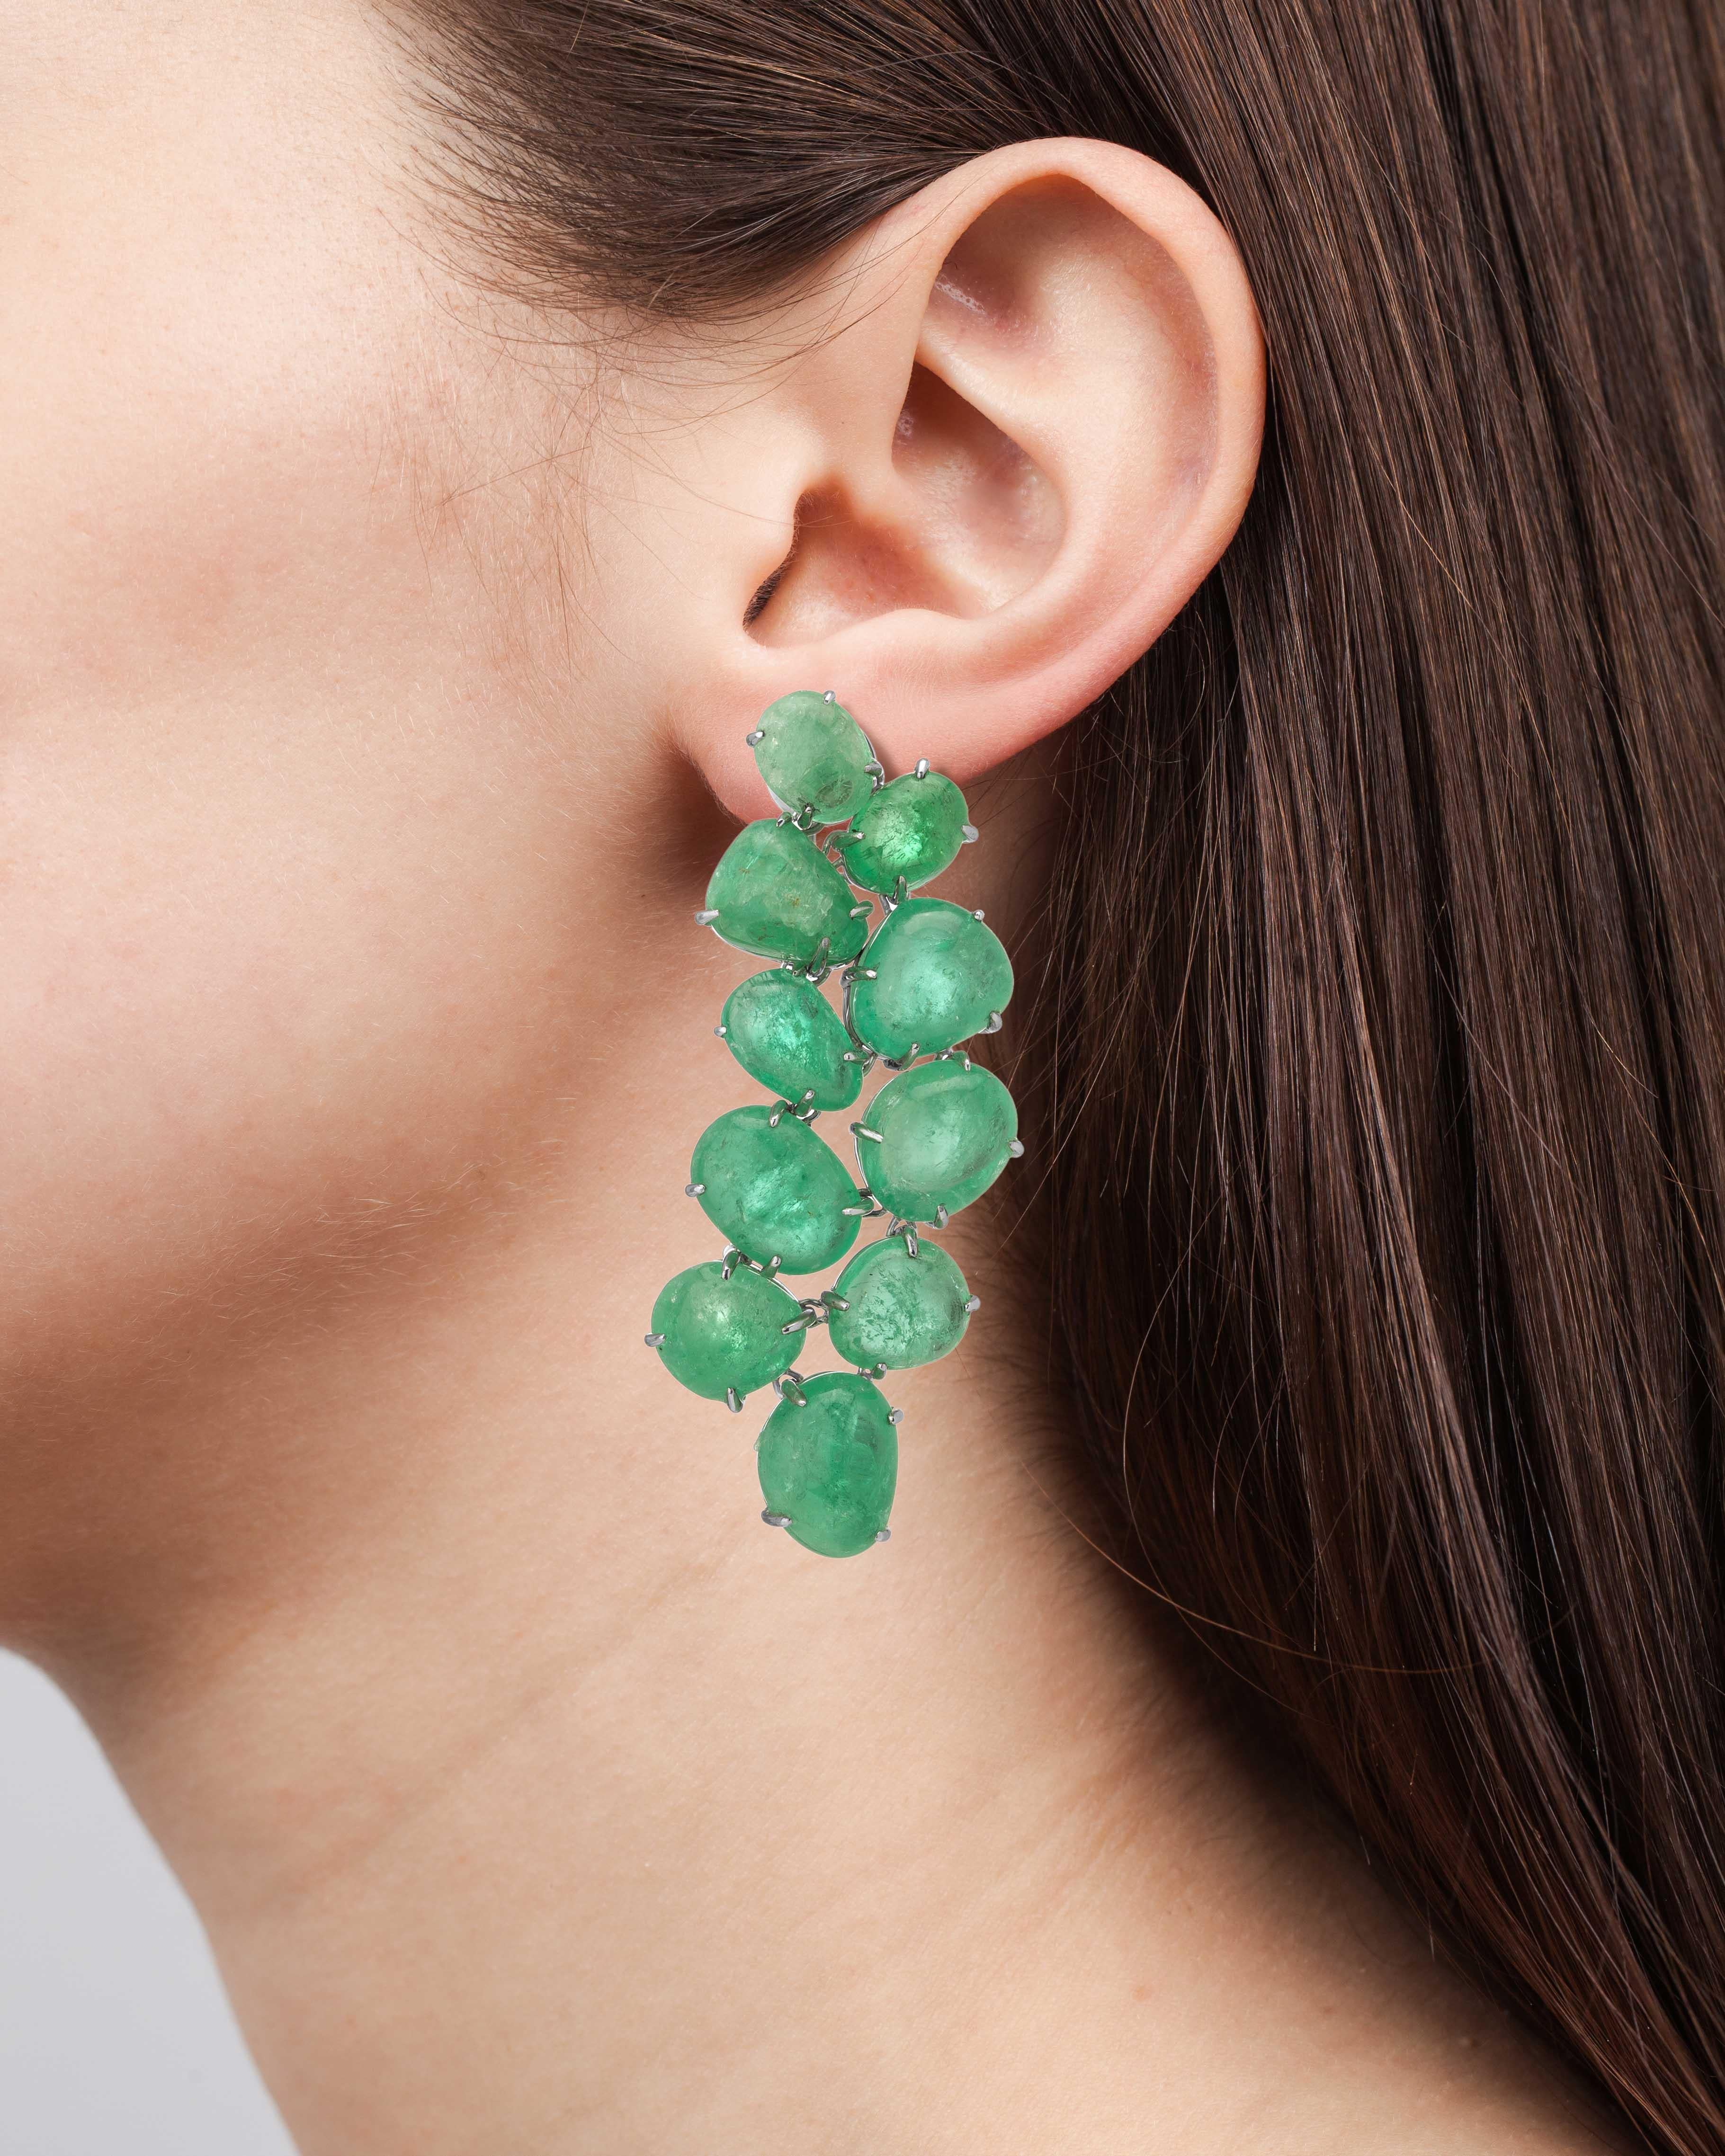 18 Karat white gold Chandelier earrings set with Muzo Colombian emeralds weighing 93.05 carats.

Muzo Emerald Colombia Heritage Muisca Earrings set with 93.05 carats Emerald.

Named in honor of the ancient indigenous people of the Muzo region of